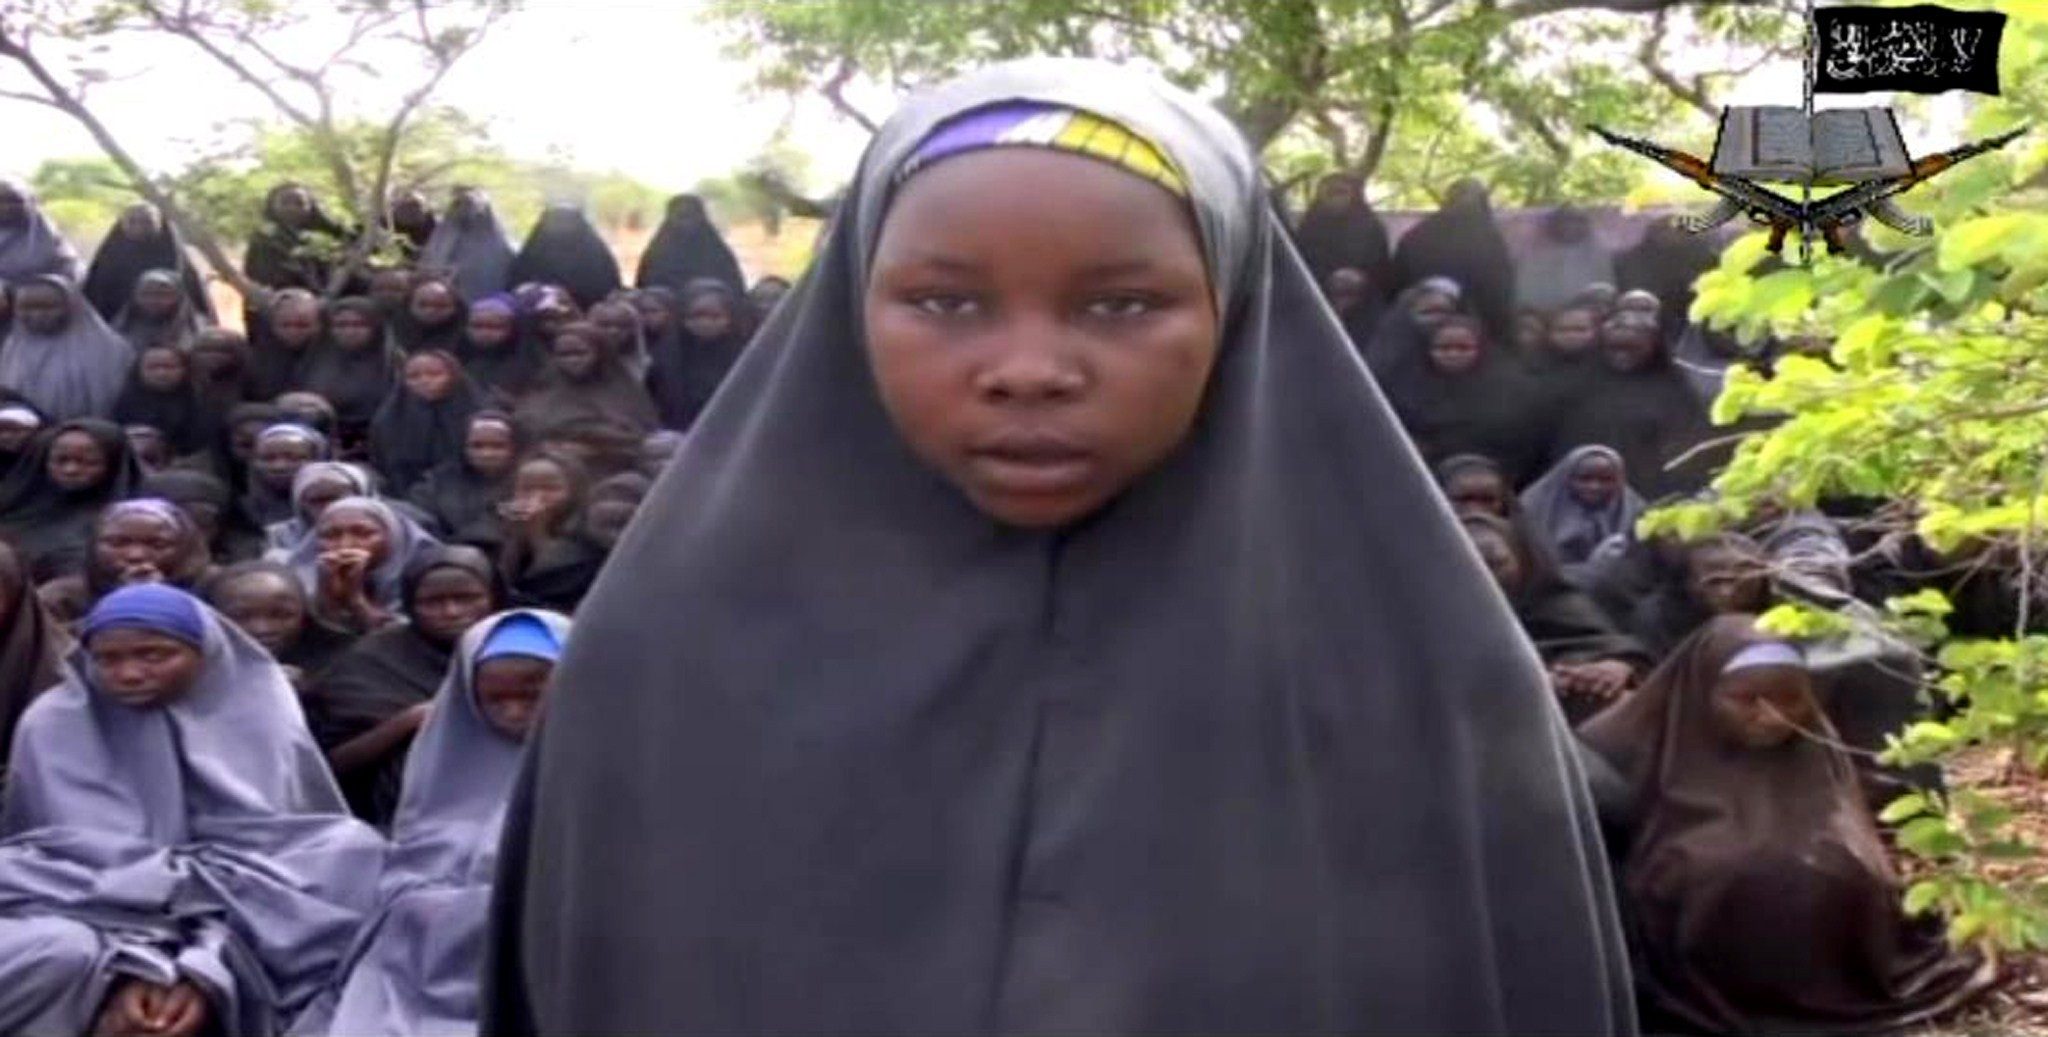 ten years after boko haram kidnapped hundreds of schoolgirls, nearly a third remain missing